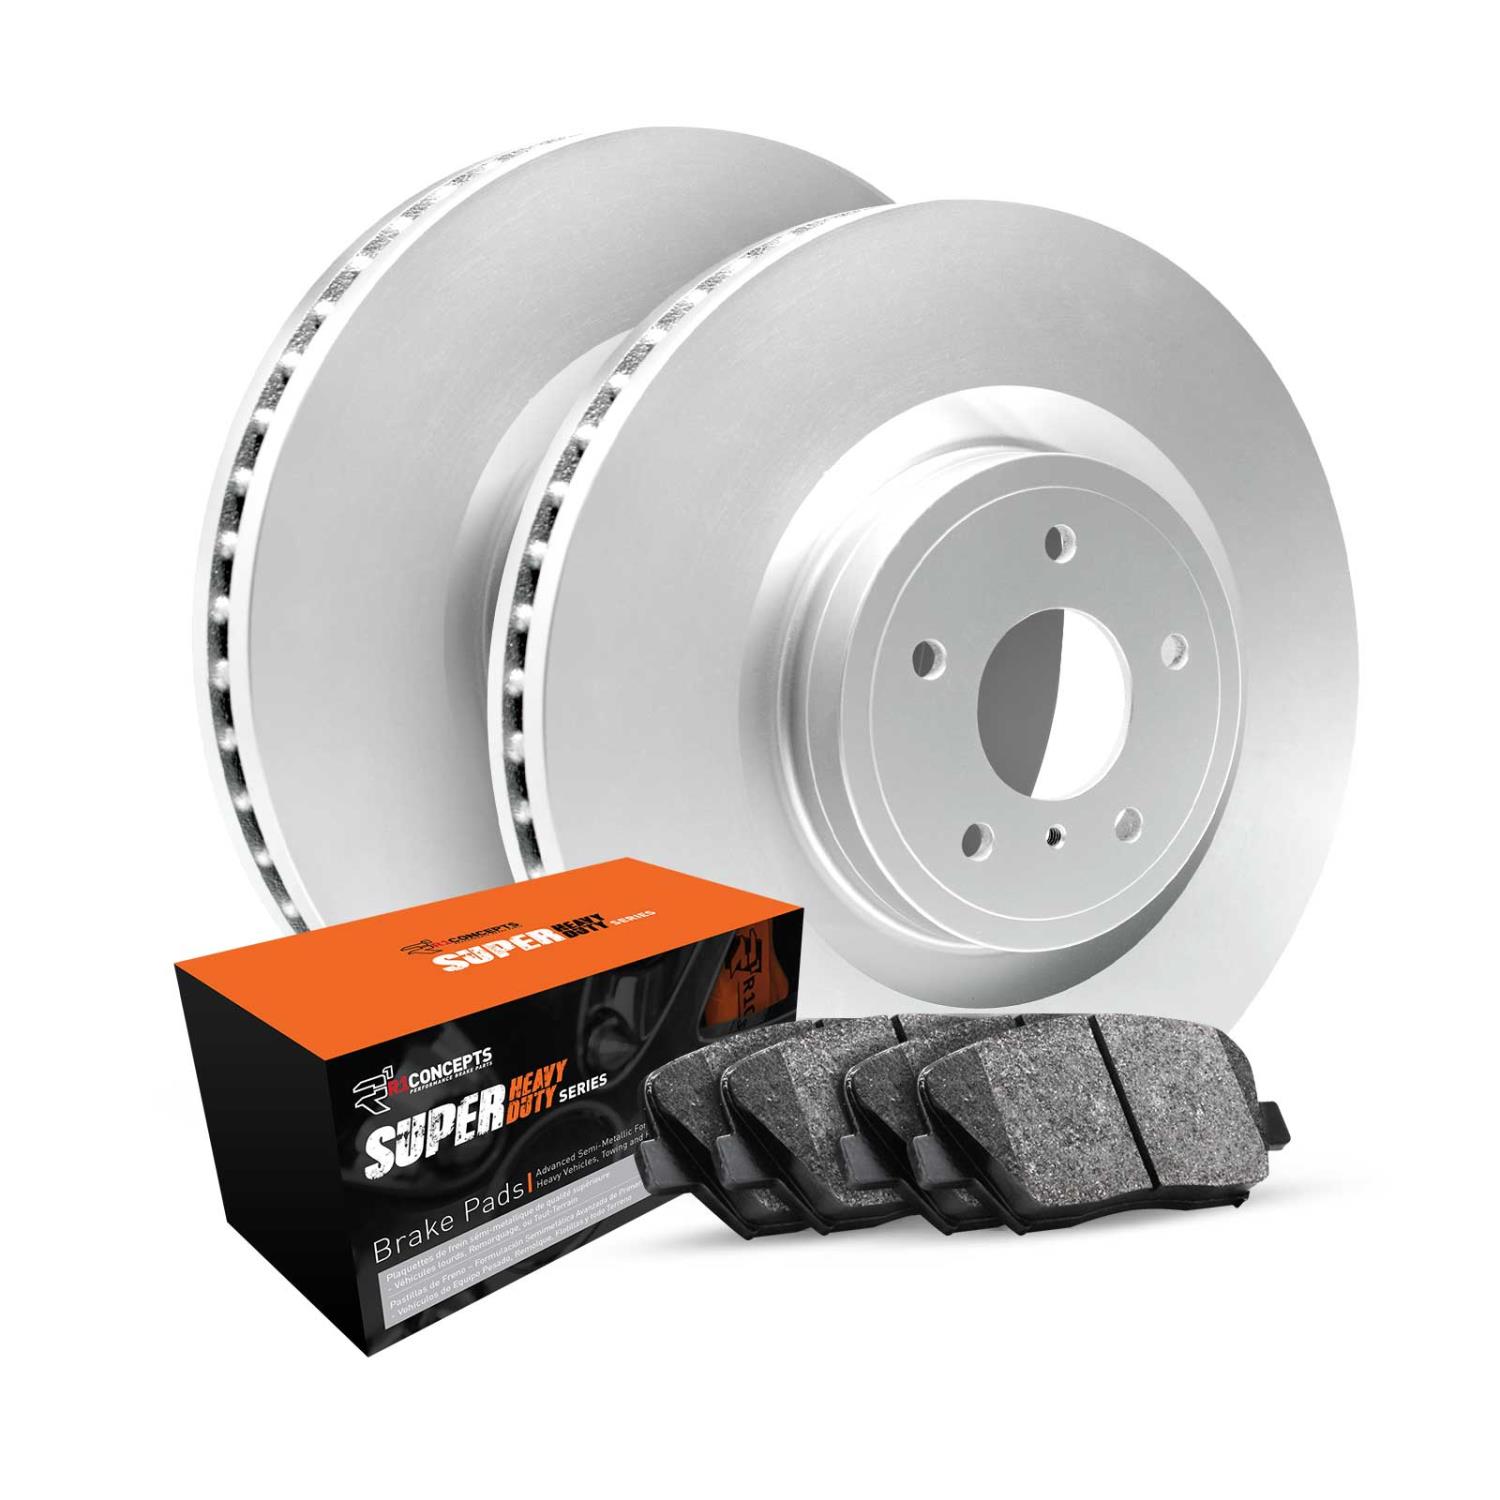 GEO-Carbon Brake Rotor Set w/Super-Duty Pads, Fits Select Fits Multiple Makes/Models, Position: Front & Rear